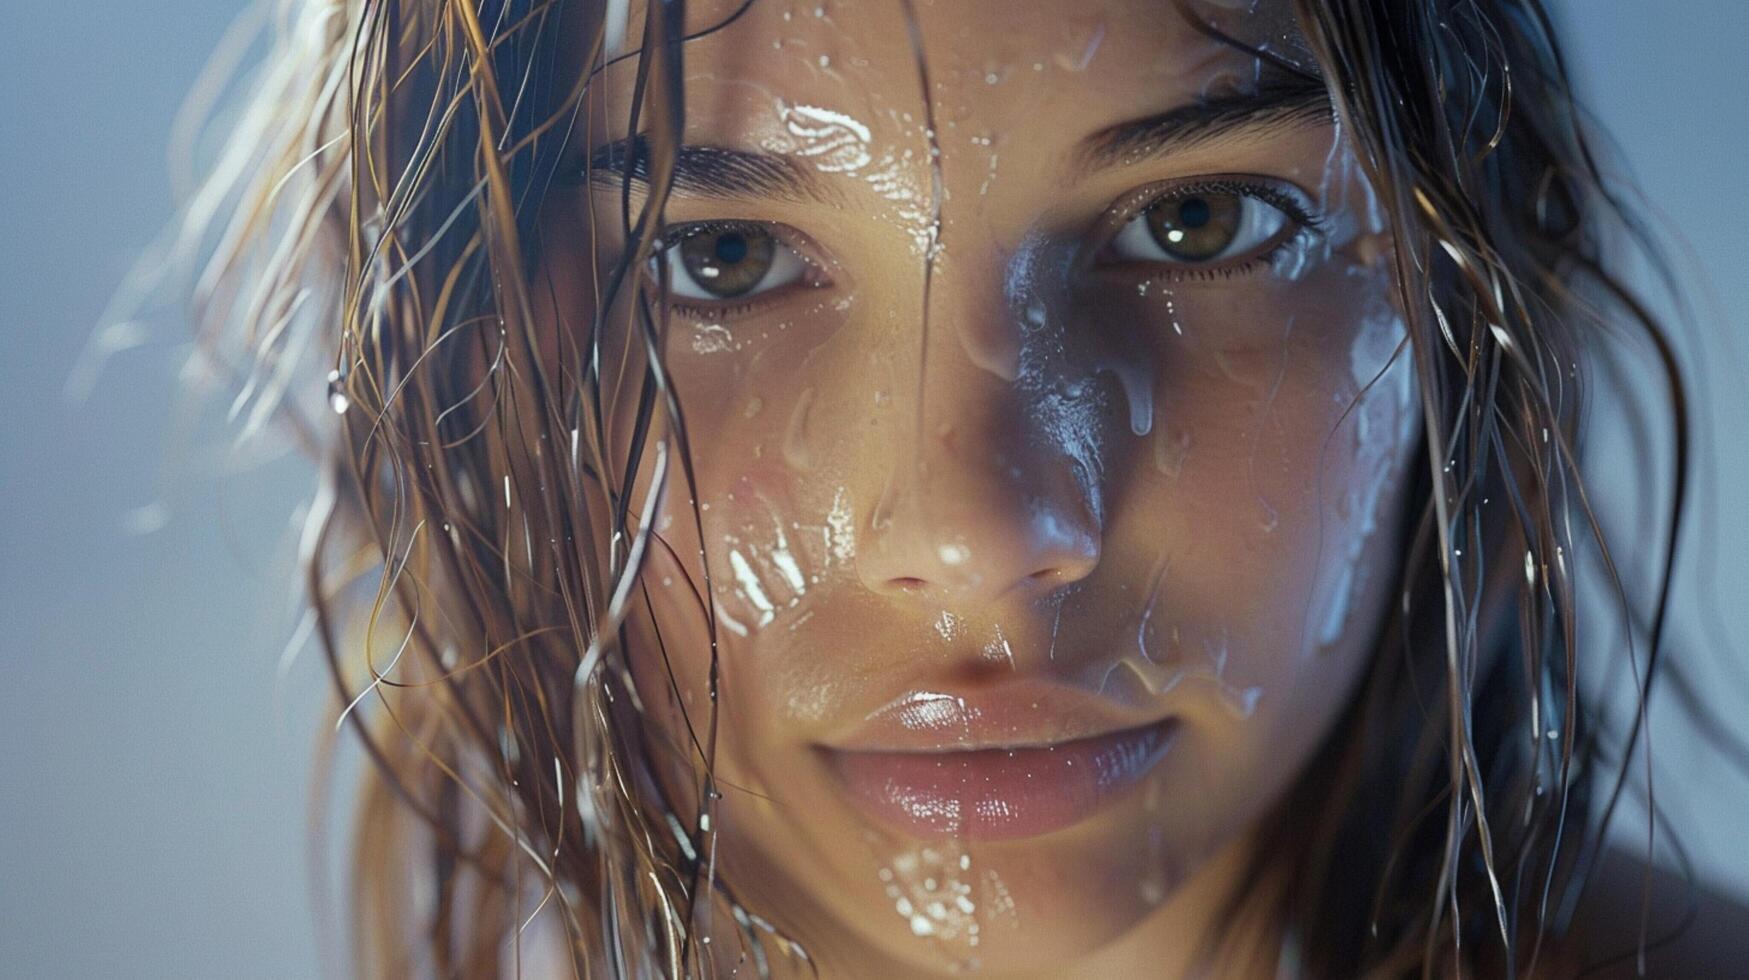 beautiful young woman with wet brown hair looking photo